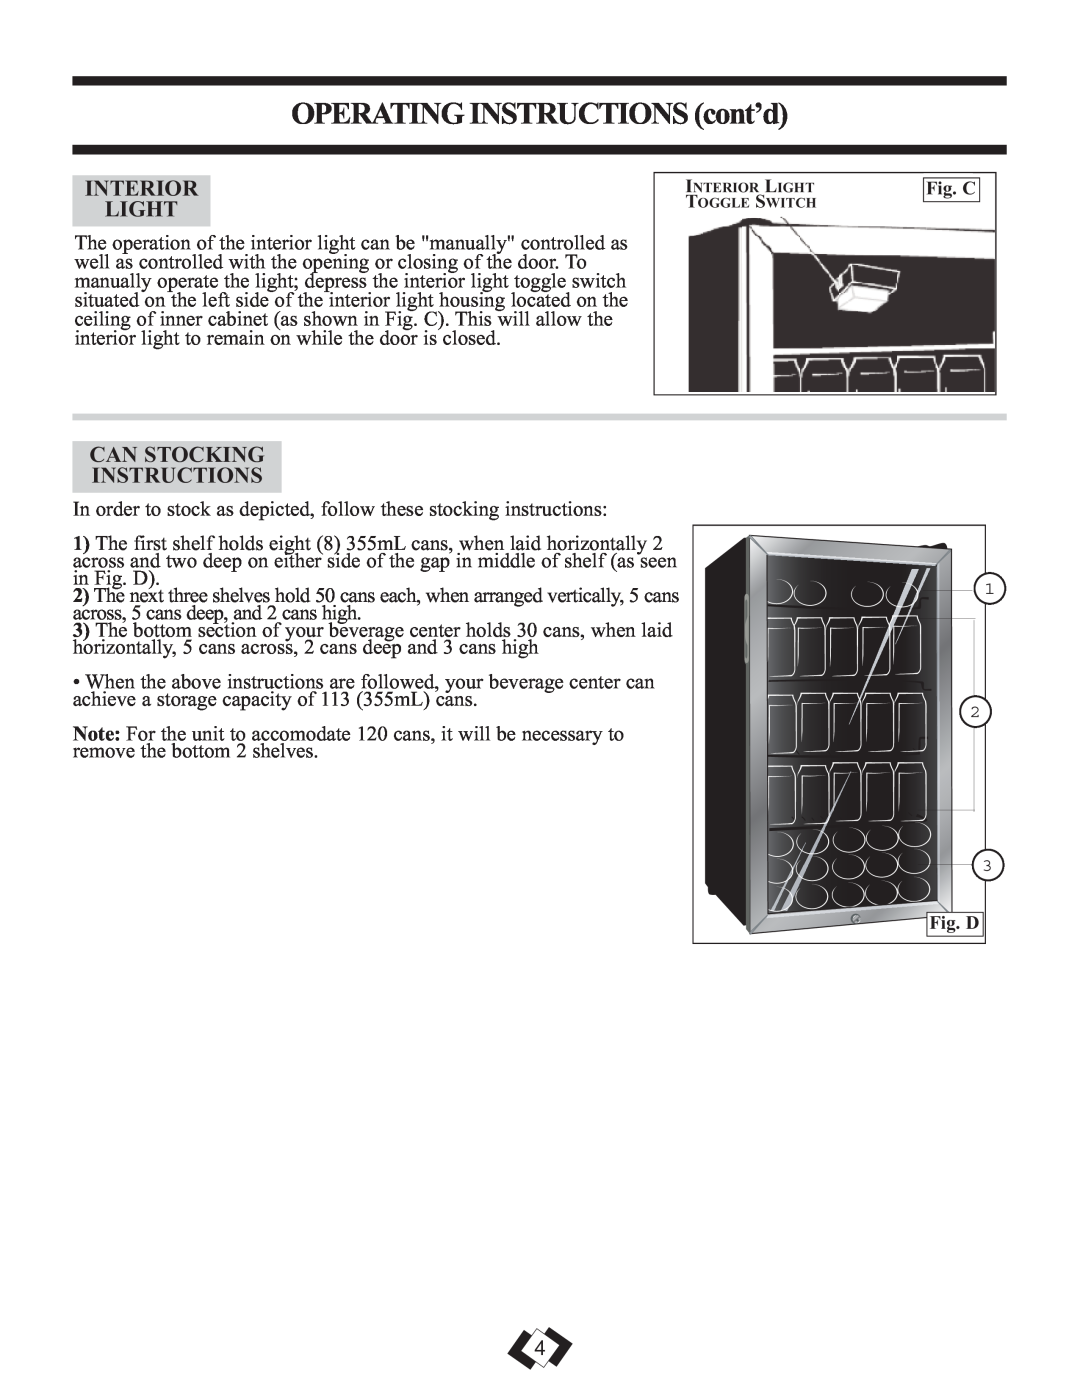 Danby DBC120BLS warranty OPERATING INSTRUCTIONS cont’d, Interior Light, Can Stocking Instructions 